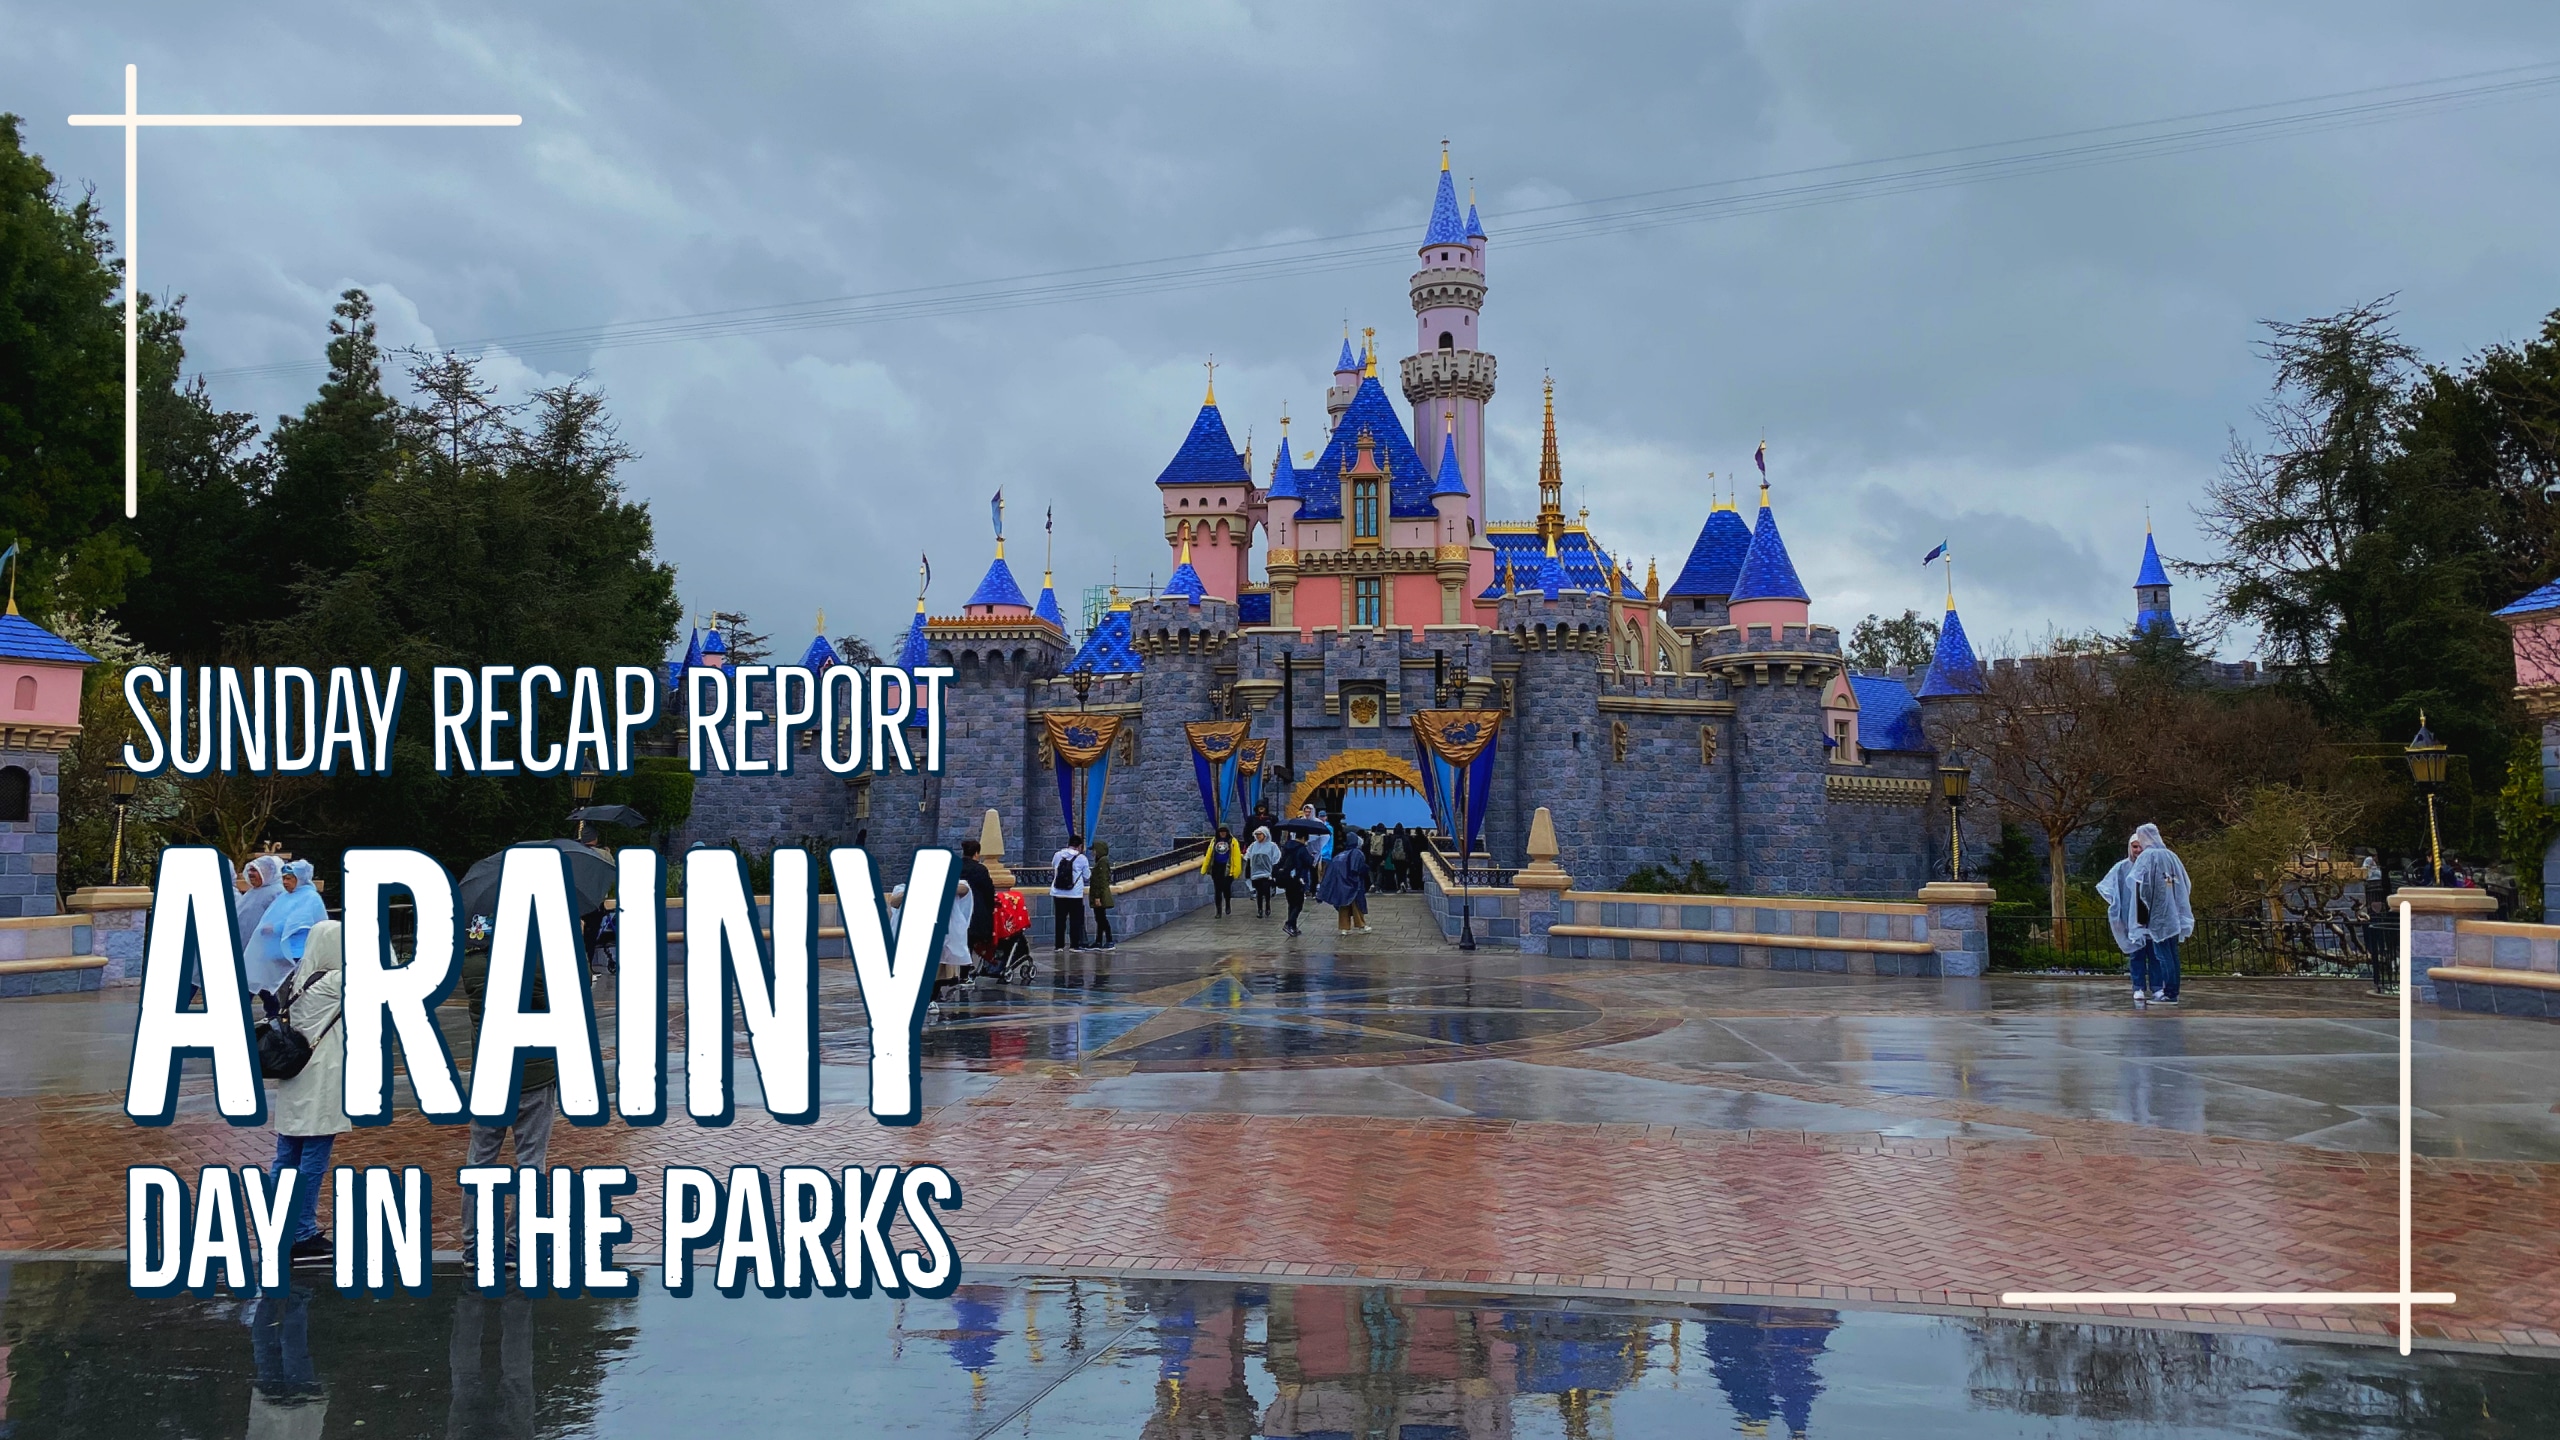 Sunday Recap Report – A Rainy Day in the Parks